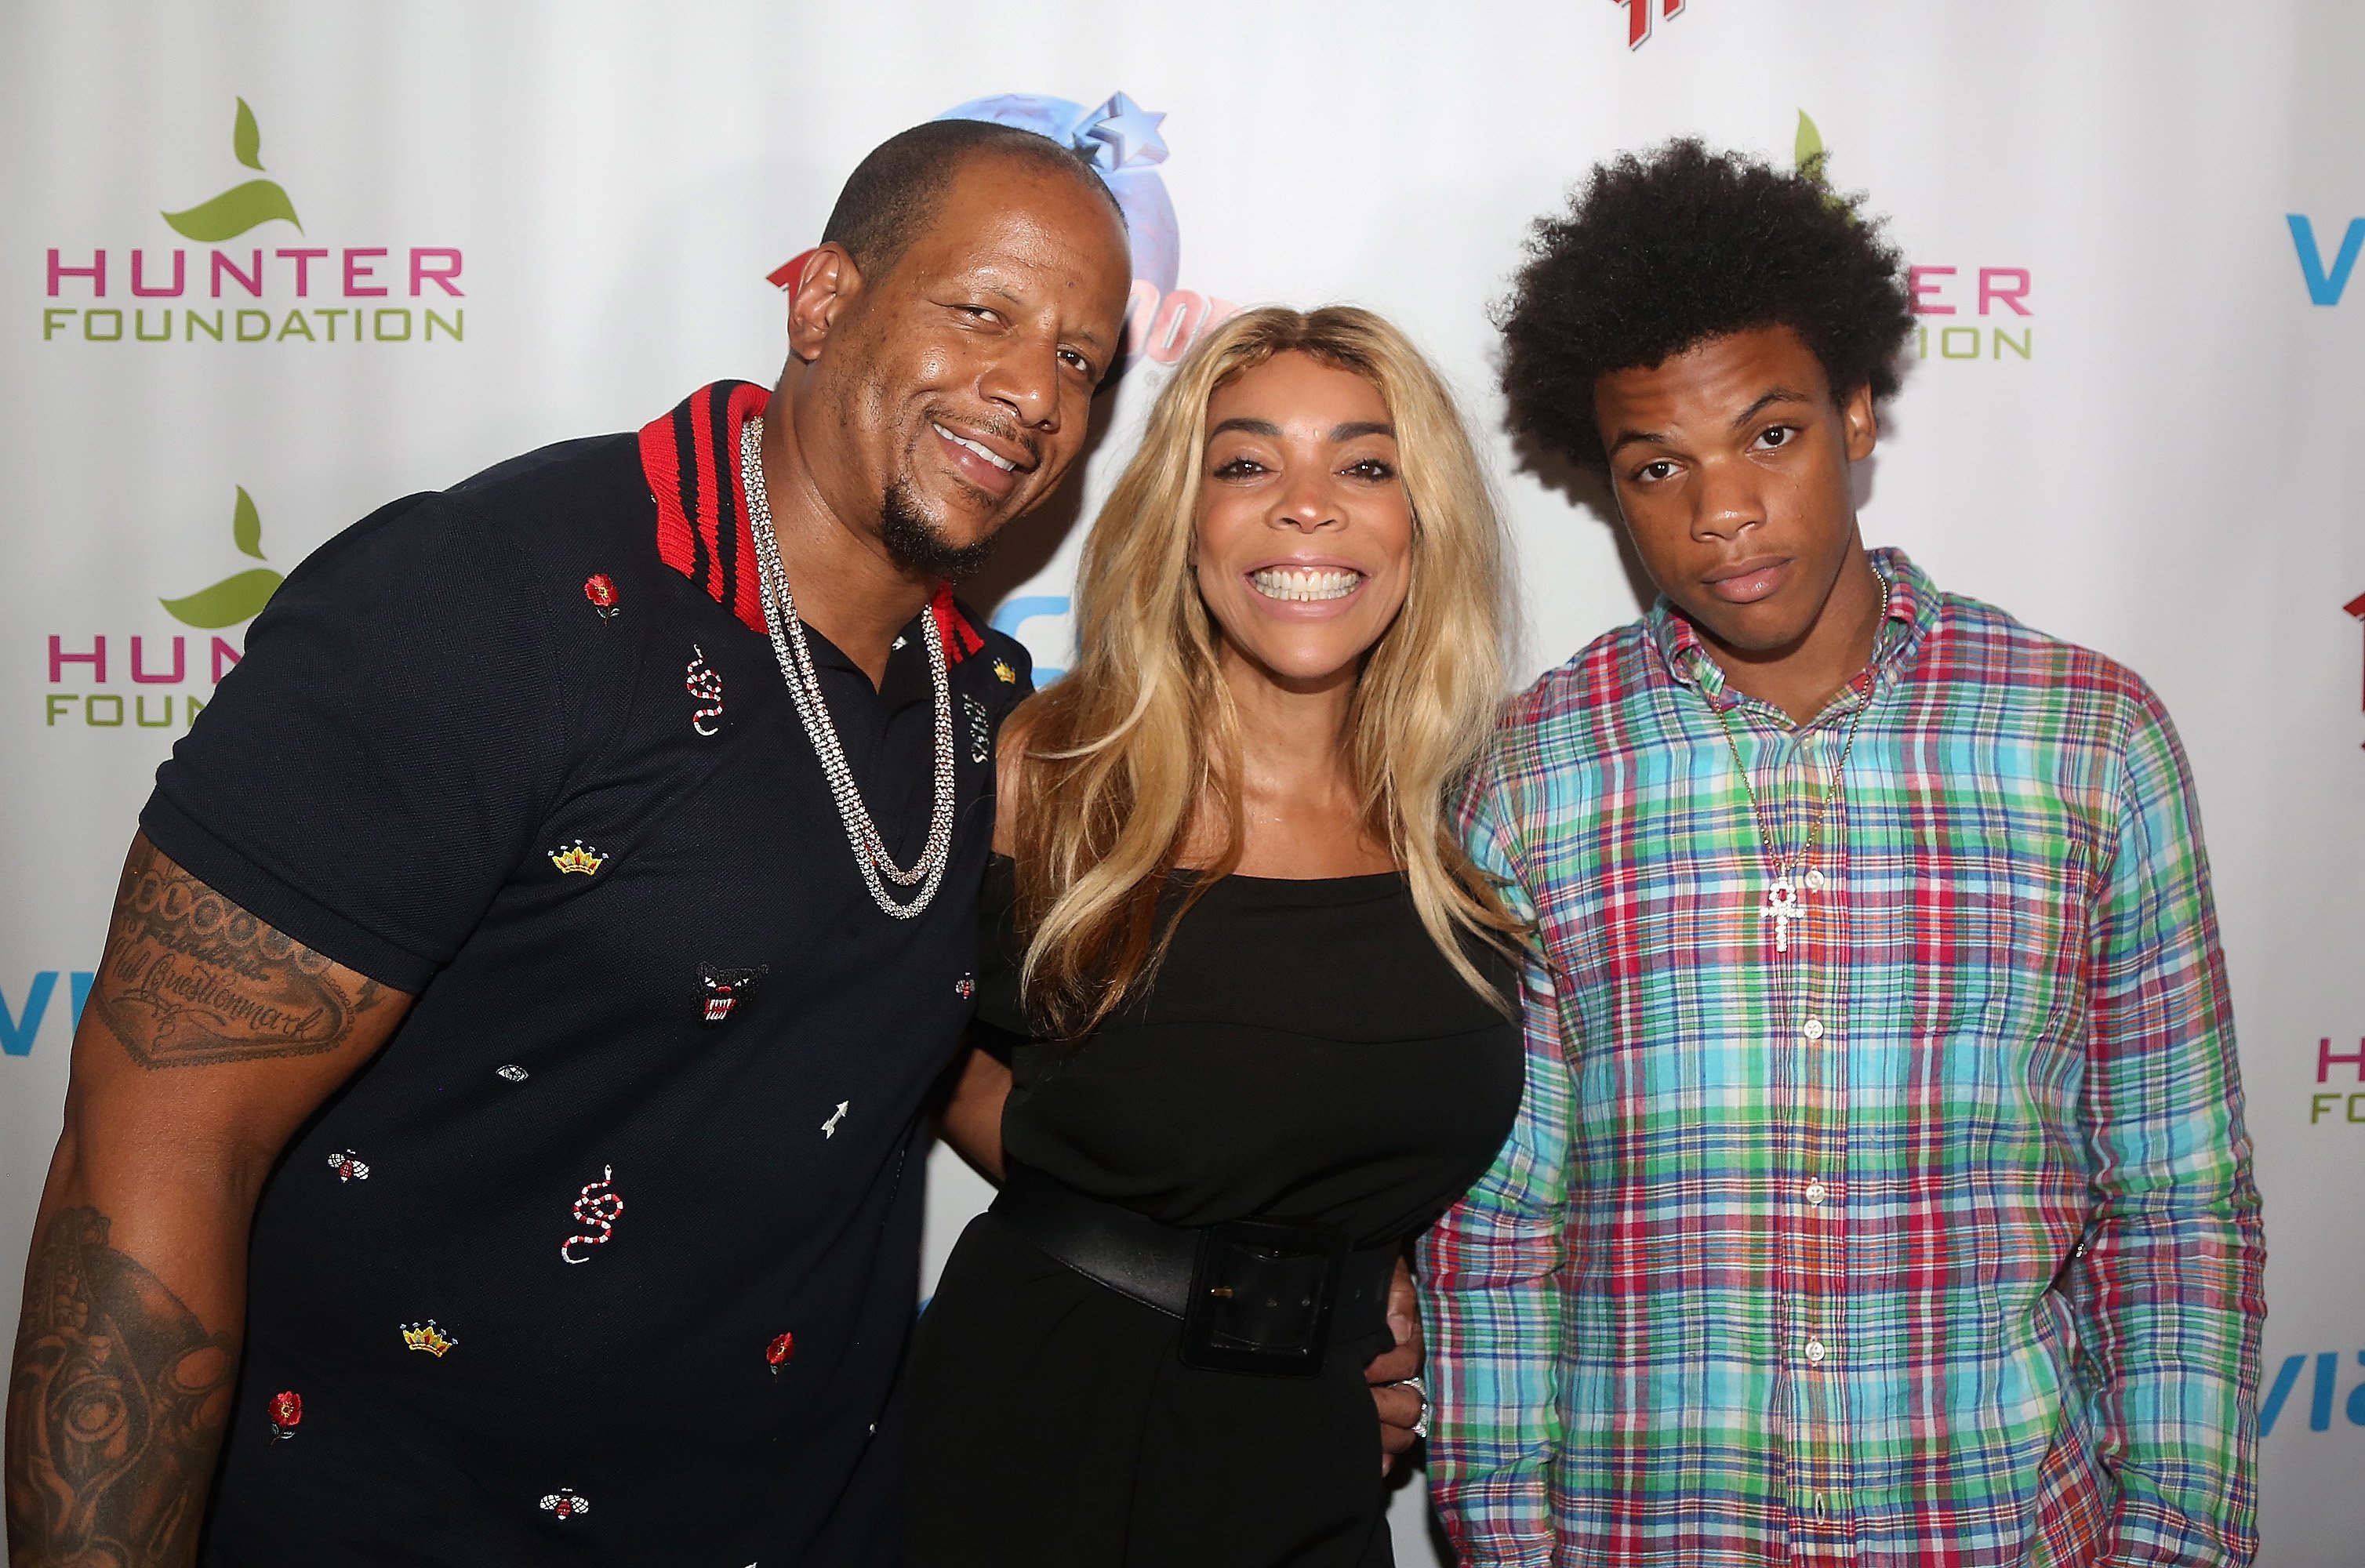 Kevin Hunter, Sr., Wendy Williams and their son, Kevin Hunter, Jr. celebrating The Hunter Foundation on July 11, 2017 at Planet Hollywood Times Square. | Source: Getty Images